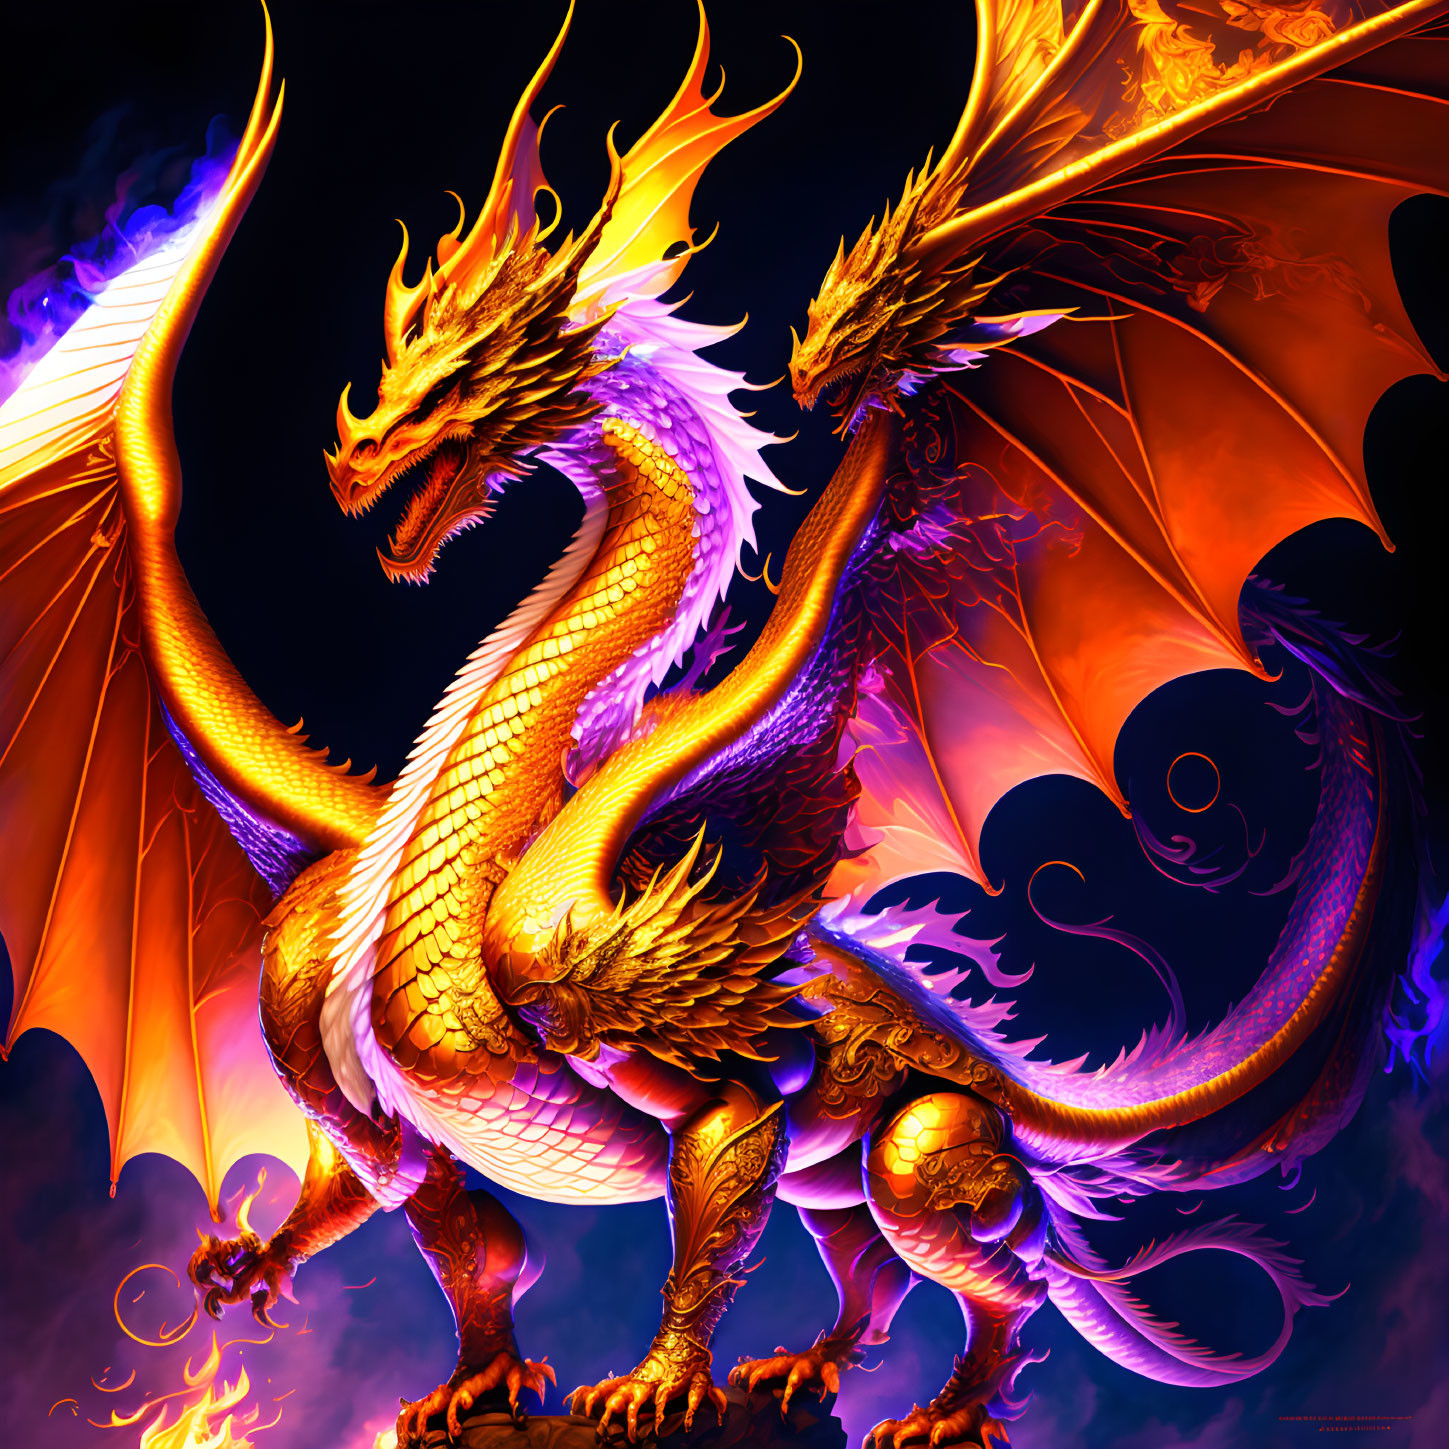 Majestic two-headed golden dragon with fiery breath in orange and purple setting